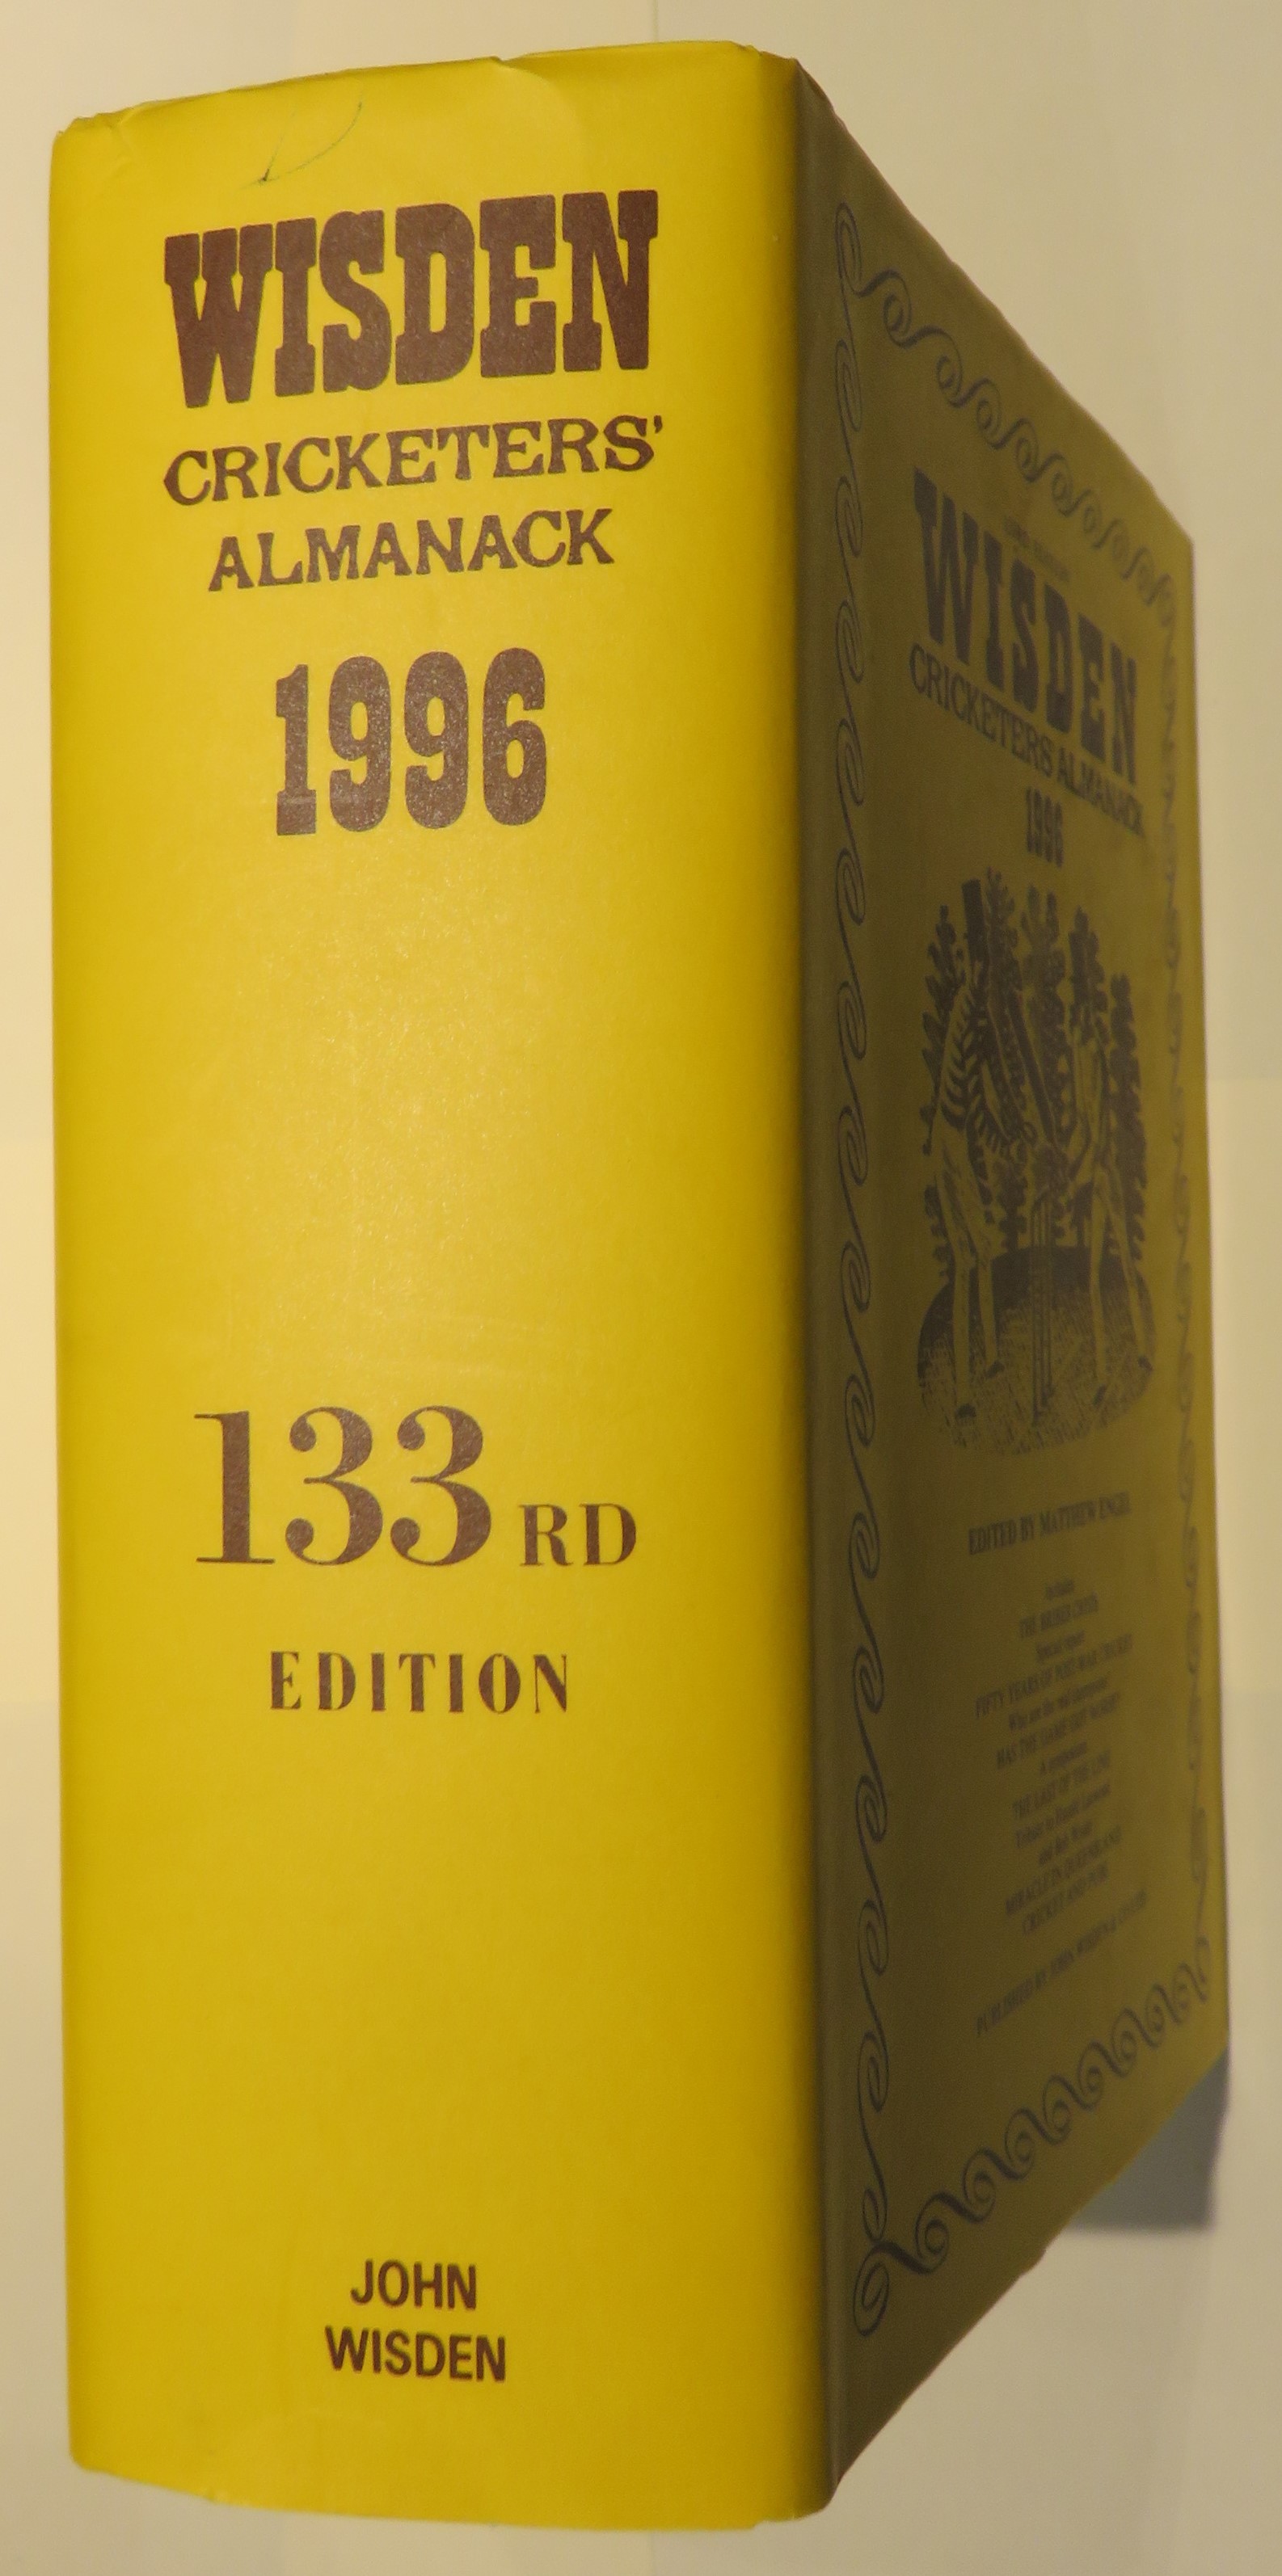 Wisden Cricketers' Almanack for the year 1996